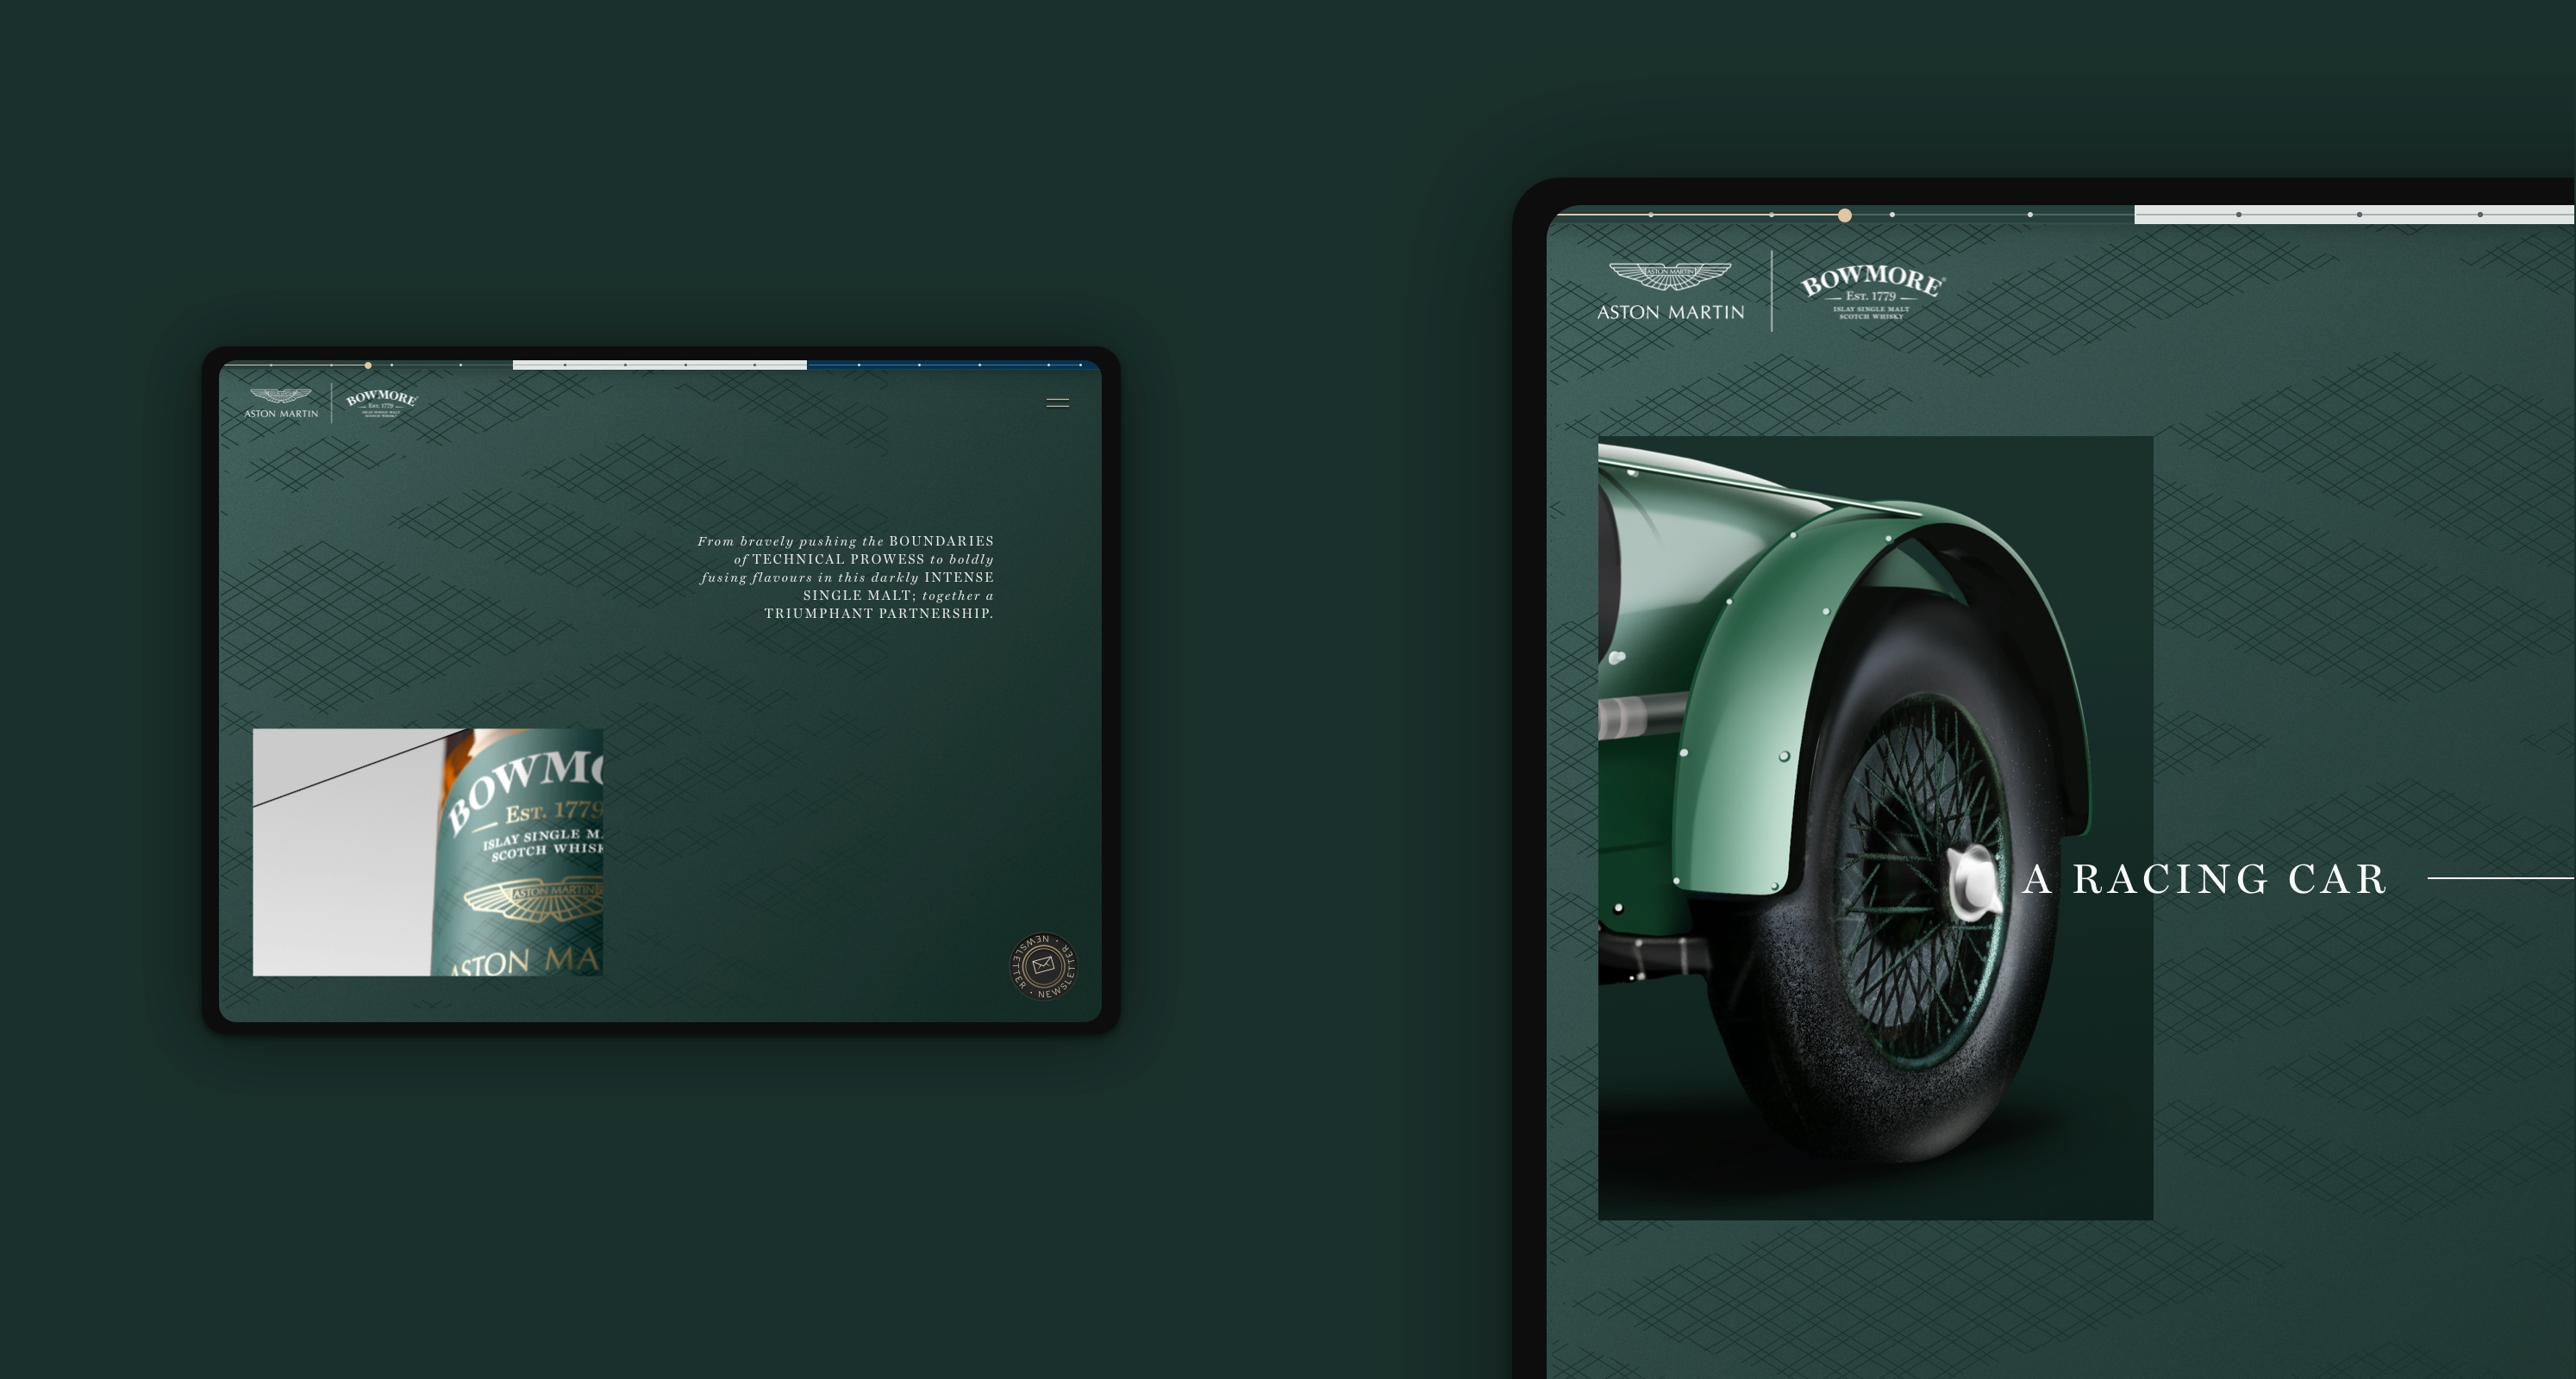 A racing green coloured background featured two mobile screens in landscape view. The two images are racing green. In the first image there is a Bowmore Aston Martin 15 year old whisky bottle label in the second image, there is an Aston Martin Le mans work" classic 1932 model car tyre.